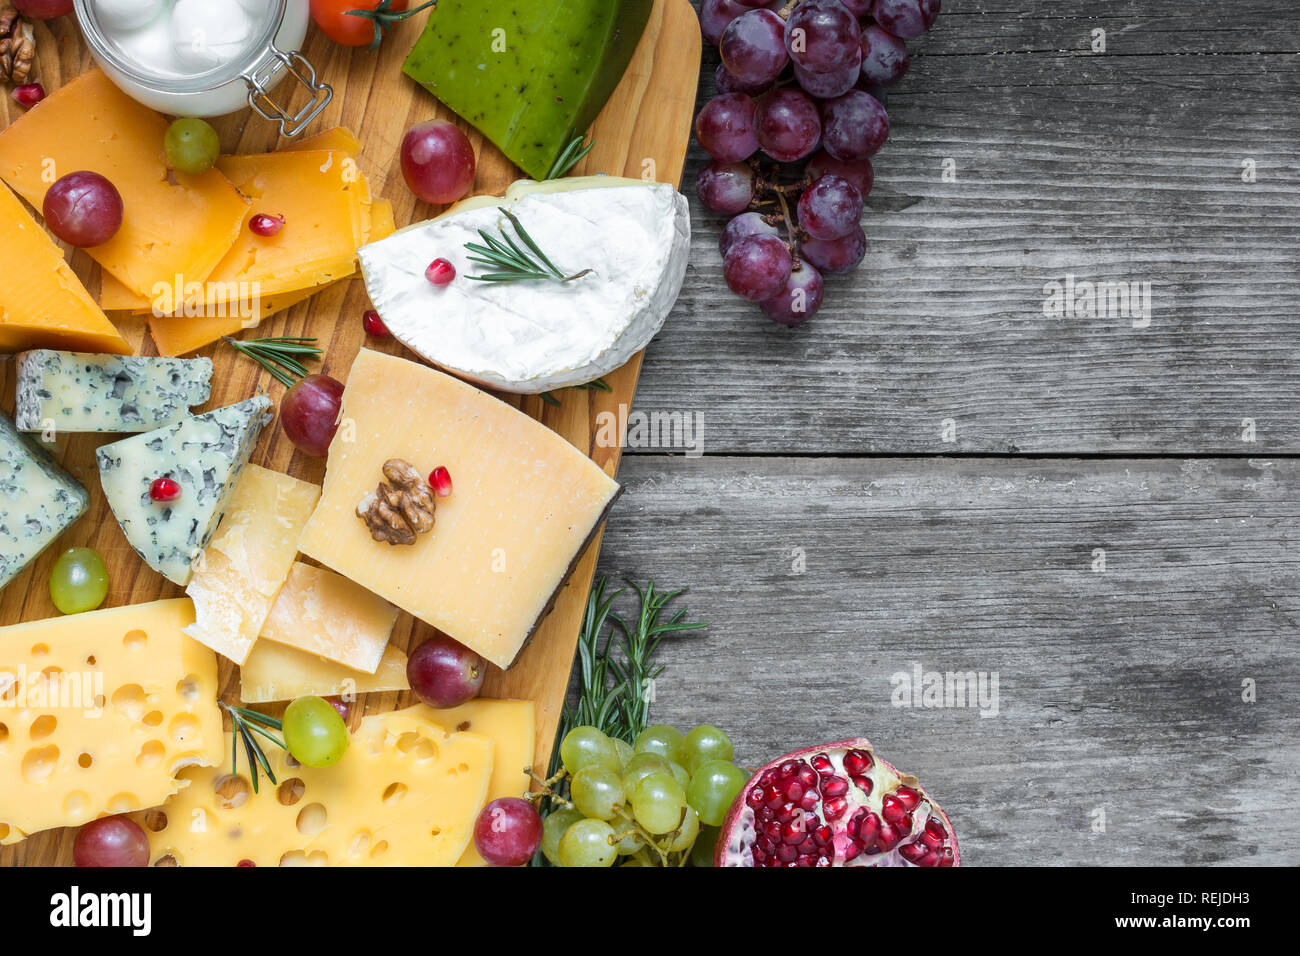 Assorted cheeses on wooden board plate served with walnuts, grapes, pomegranate and rosemary on rustic wood background, top view with copy space Stock Photo